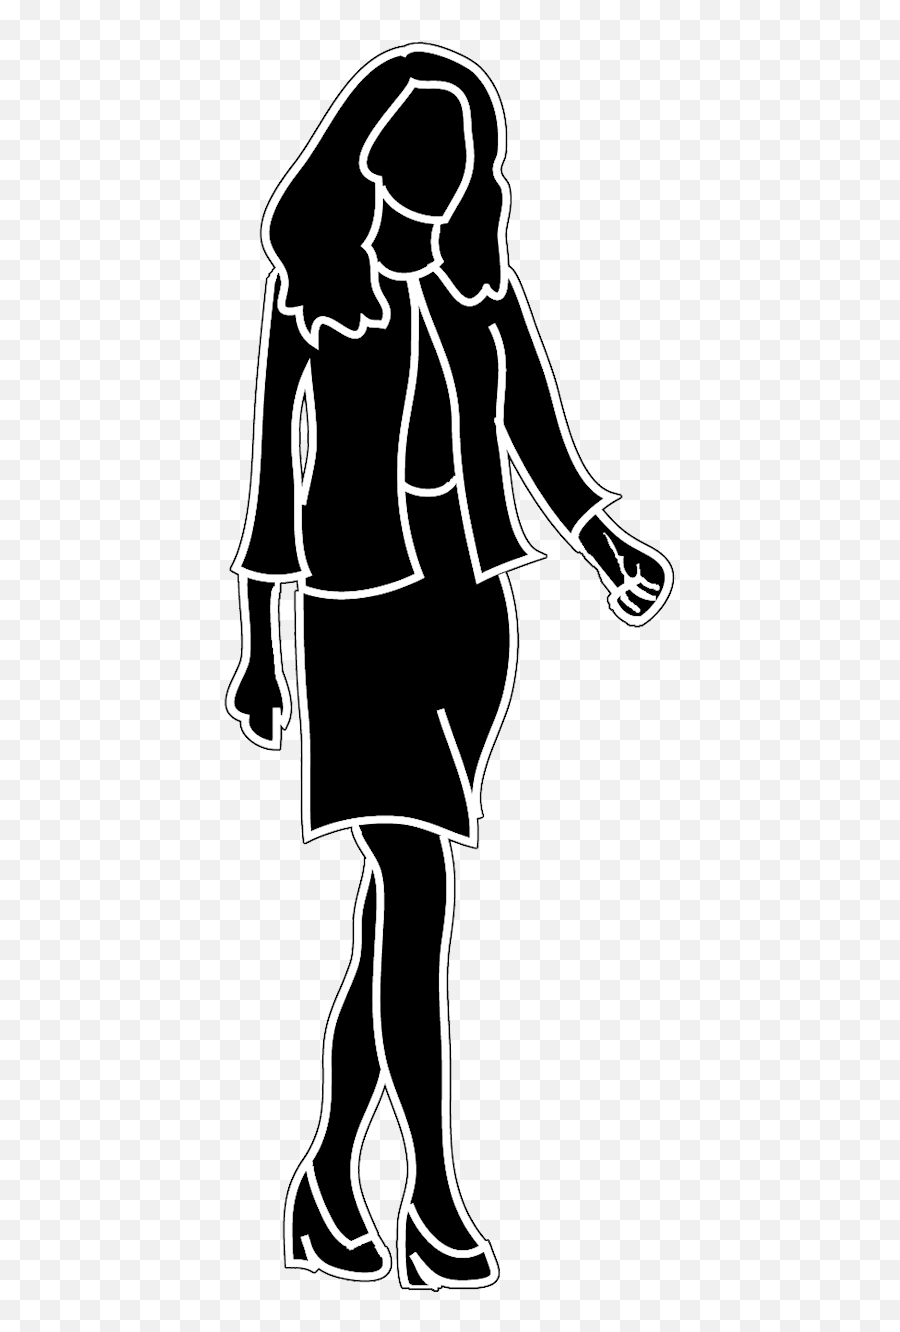 Silhouettes Of People - Silhouette Clipart Portable Network Graphics Emoji,Woman Silhouette Png